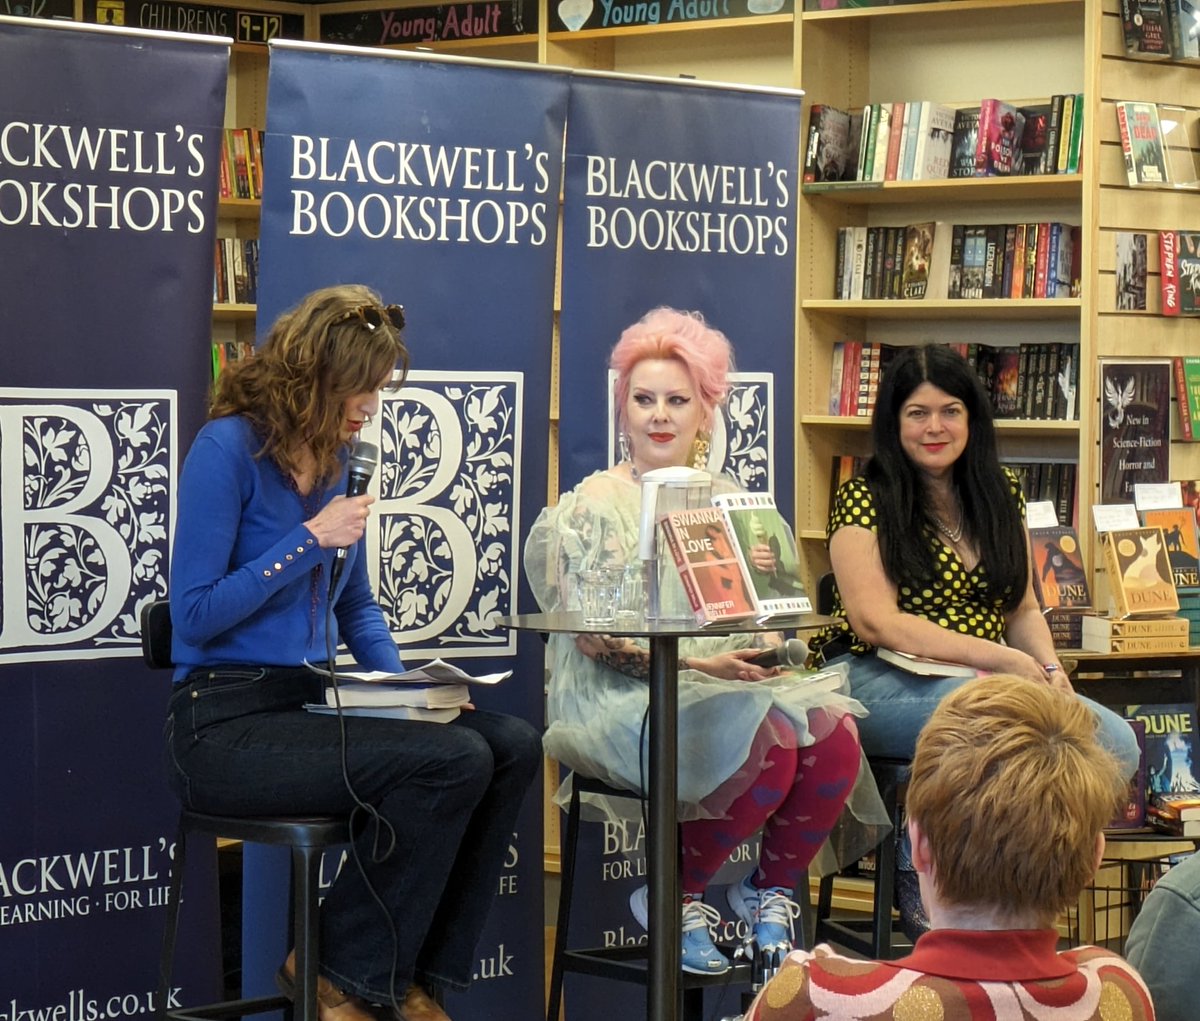 the absolute dream team of a panel at @BlackwellsMcr this evening with @RegretteRuane and Jennifer Belle in conversation with @NaomiBooth. Incredible authors and the sweetest people! Don't sleep on Swanna In Love and Birding 💖